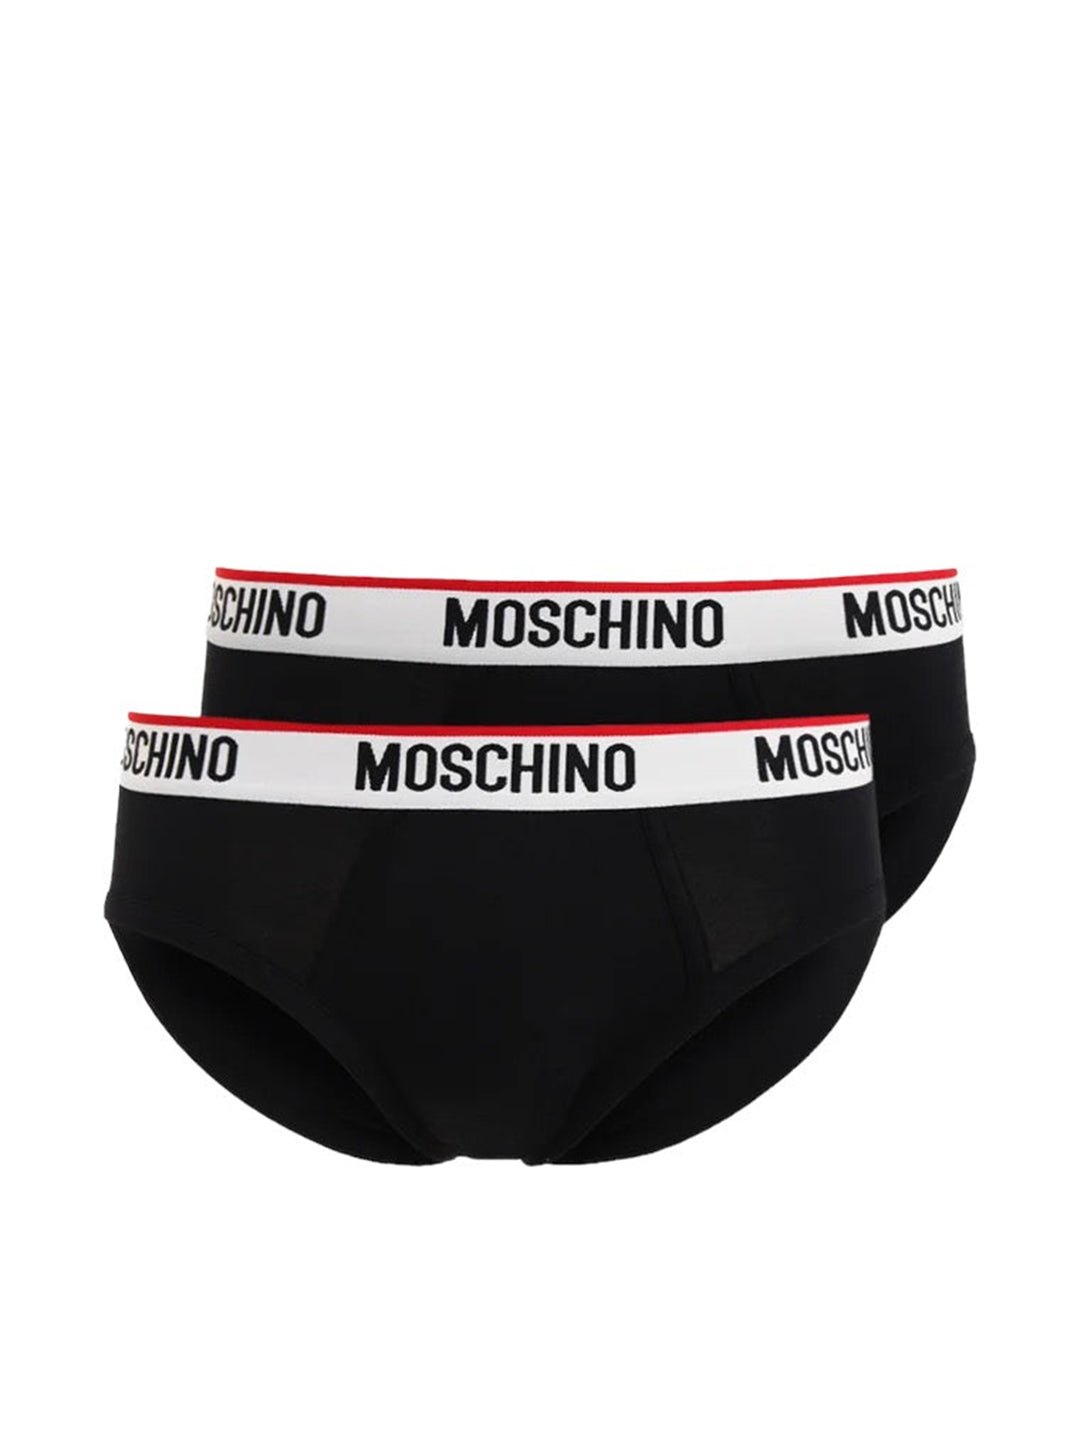 Moschino black briefs set in bipack packaging